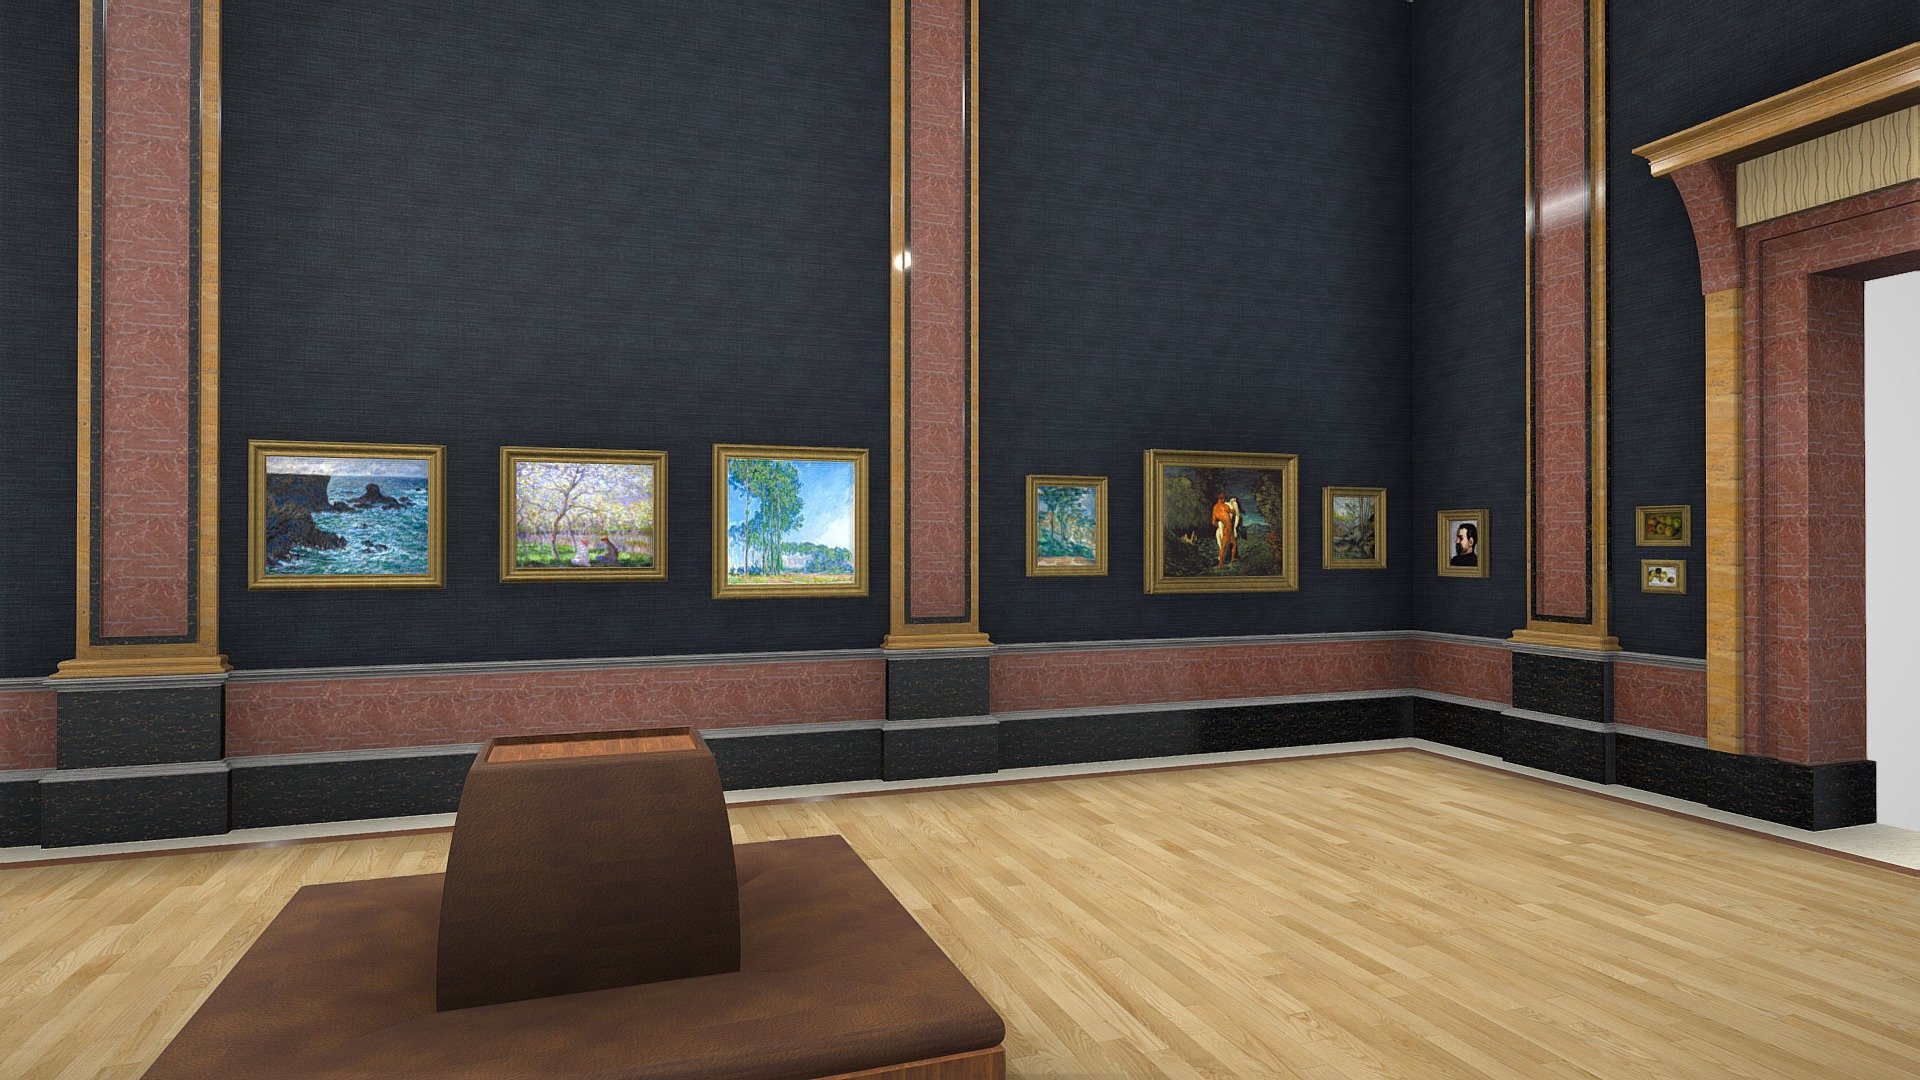 Gallery 5: French Art of the 19th and 20th Century.
This gallery is currently closed for refurbishment.

All galleries are subject to change and may not be accurate in comparison to a visit in the future.
Created using SketchUp Pro 2020, nothing in this model is scanned 3d model